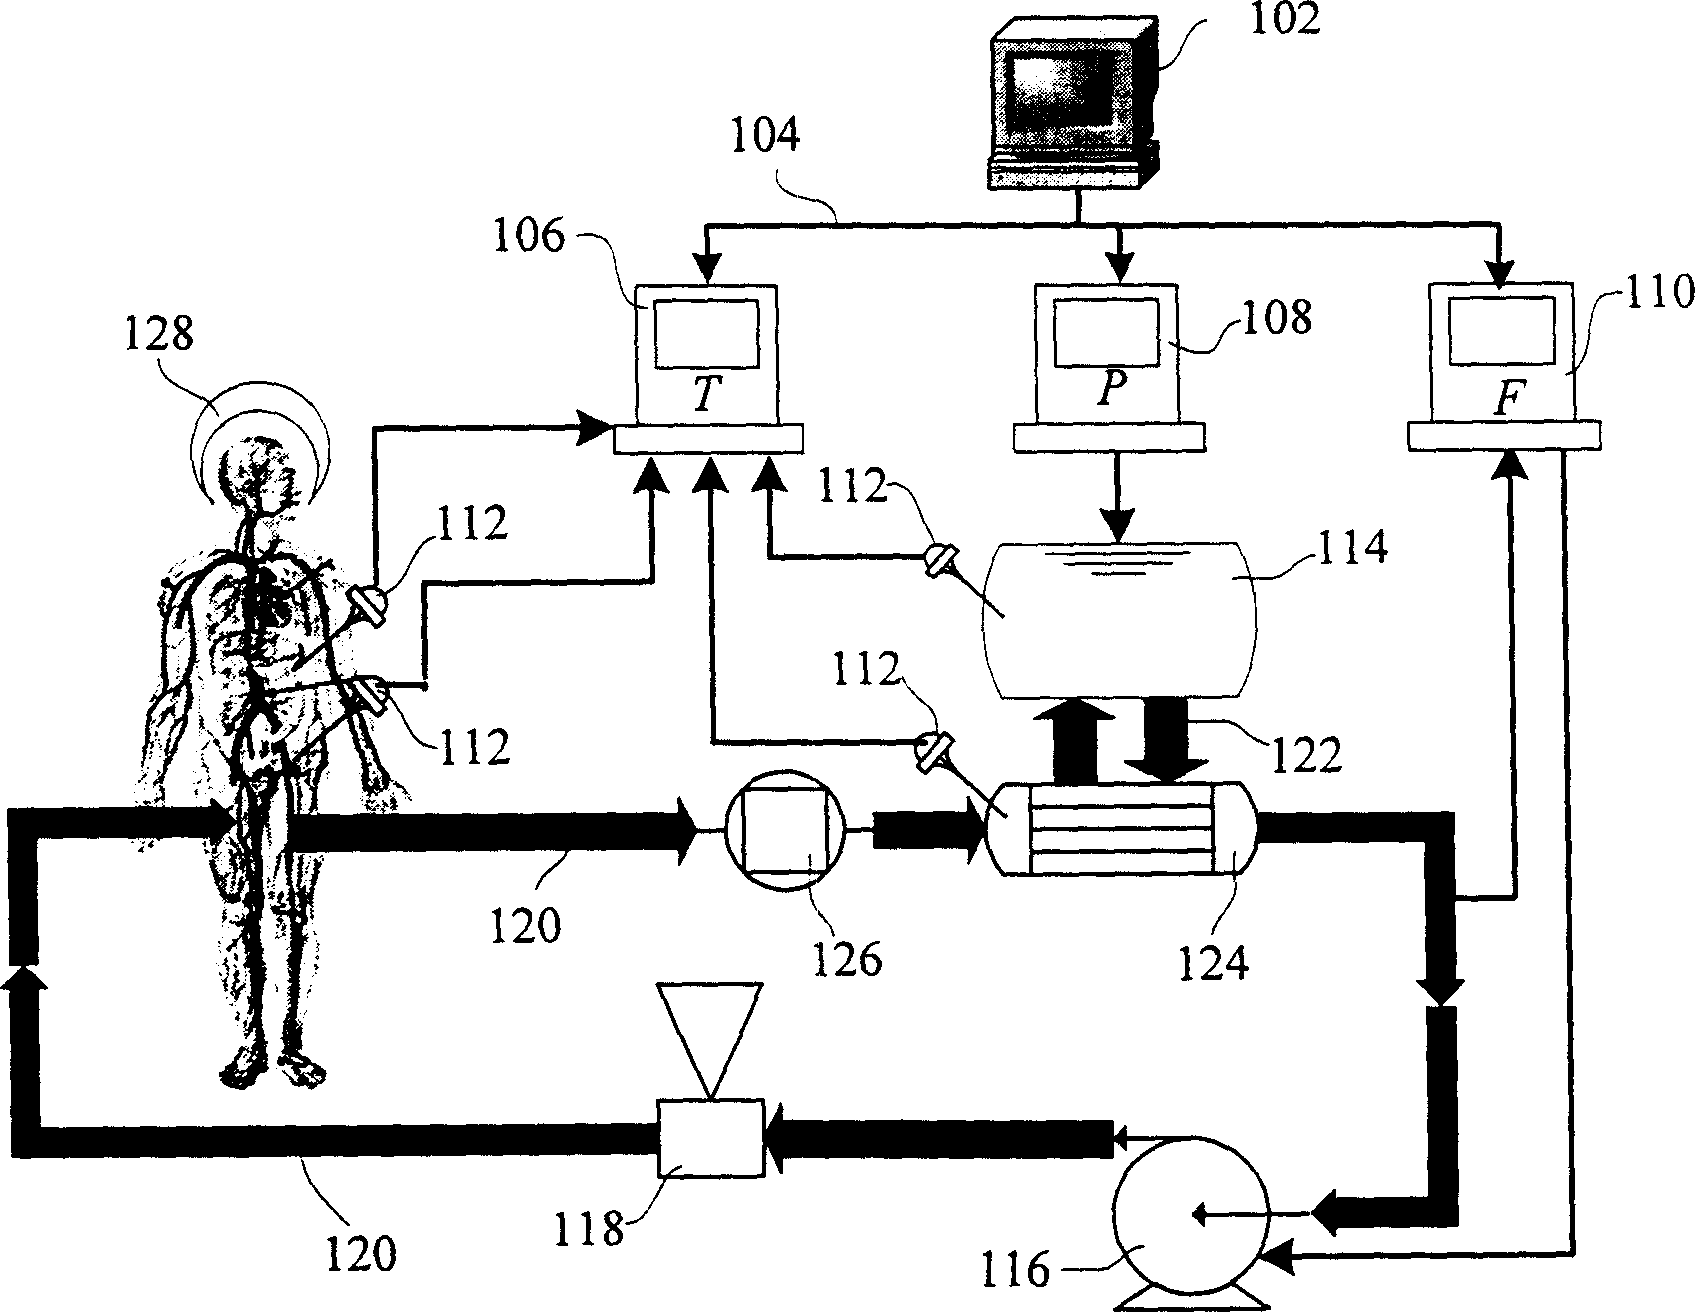 Miniature blood temperature varying system based on computerized distributed control